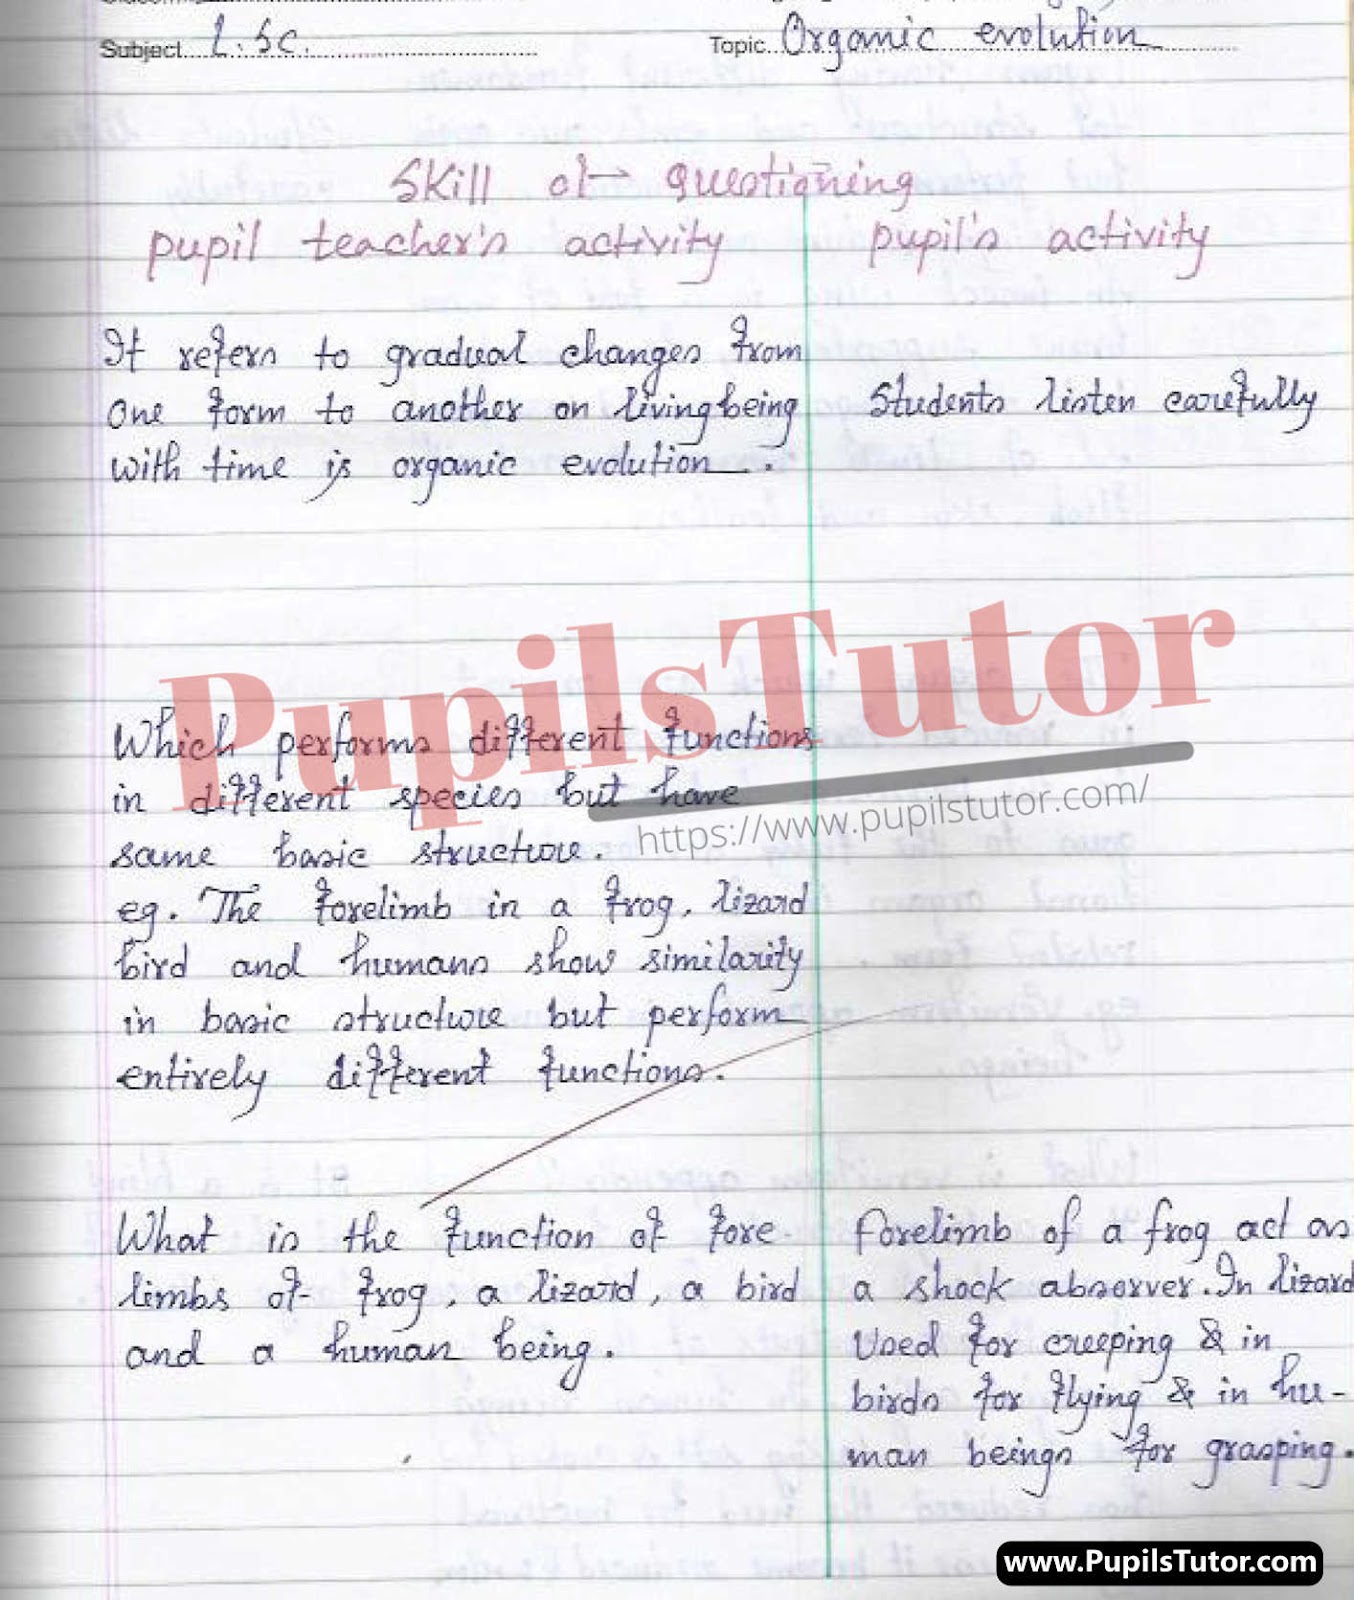 Concept Of Organic Evolution Lesson Plan – (Page And Image Number 1) – Pupils Tutor